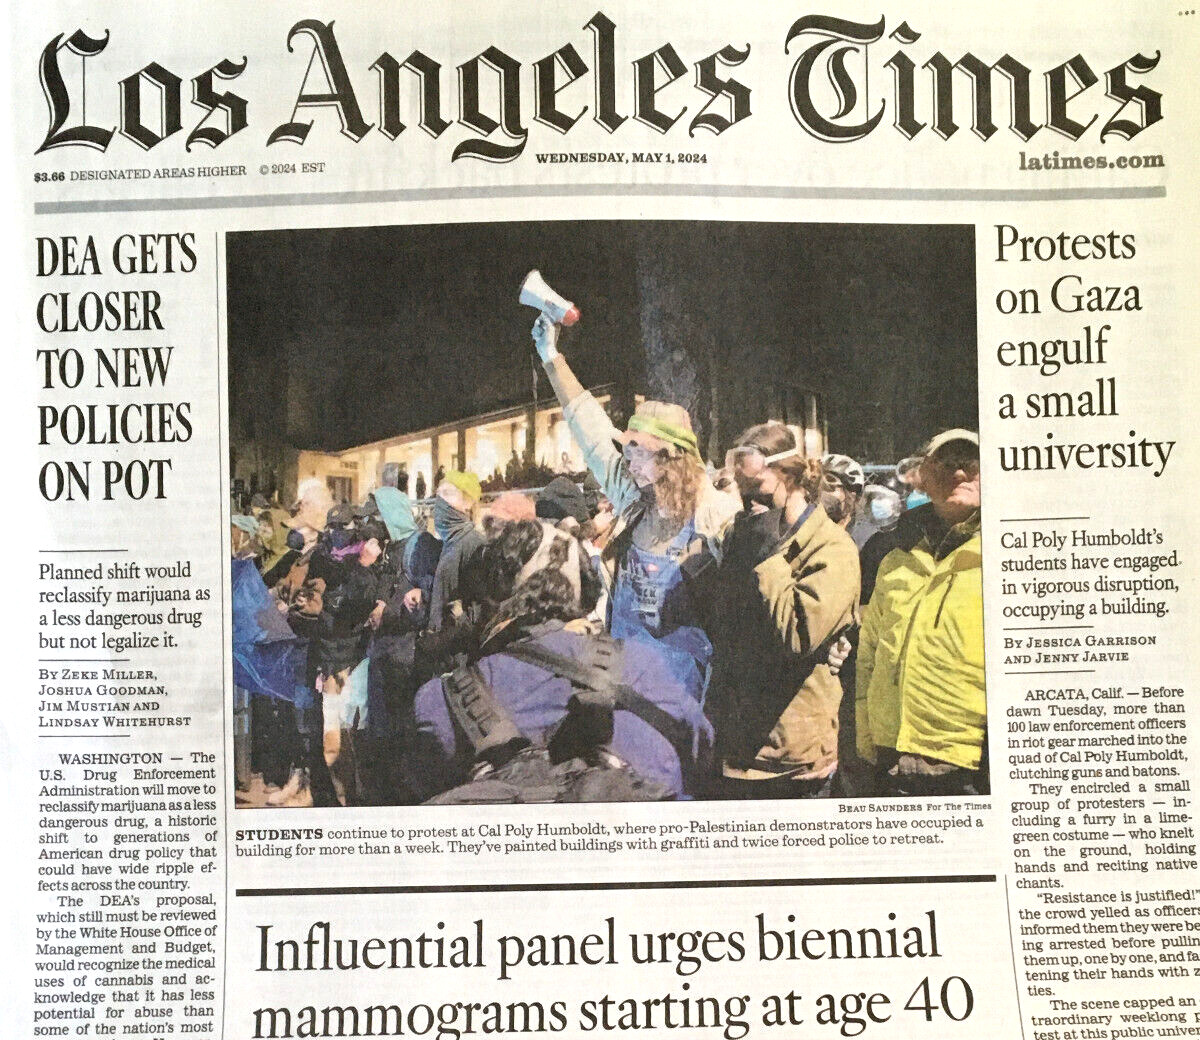 LOS ANGELES TIMES May 1, 2024 CAL POLY HUMBOLDT PRO-PALESTINIAN DEMONSTRATORS